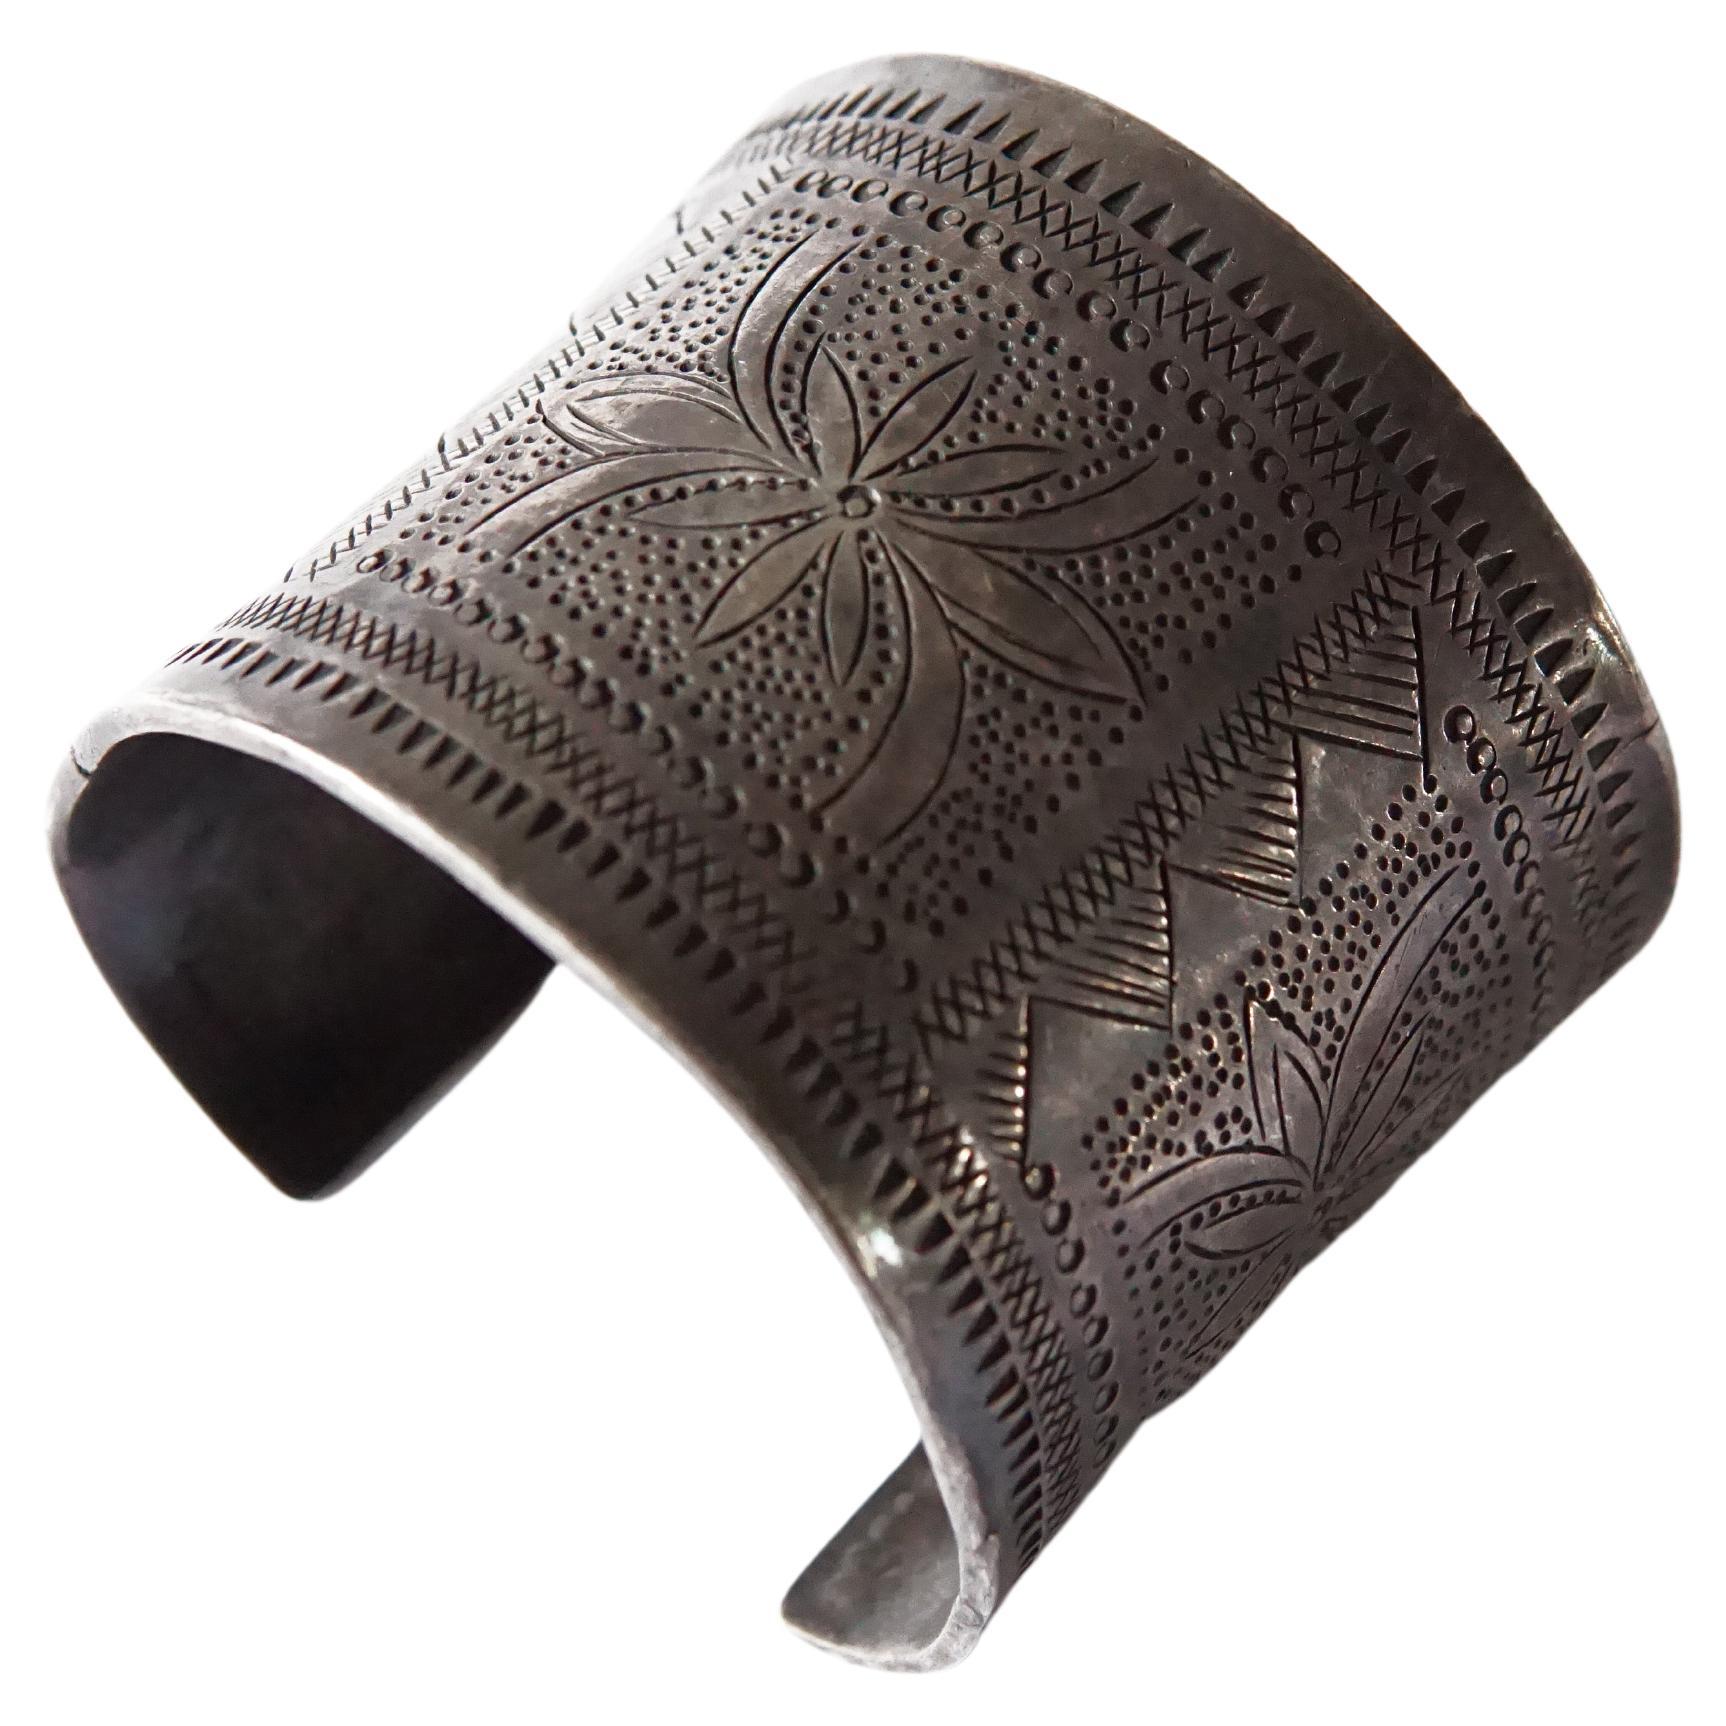 Antique Thai Hill Tribe Cuff Bracelet with Engraved Tribal Patterns For Sale